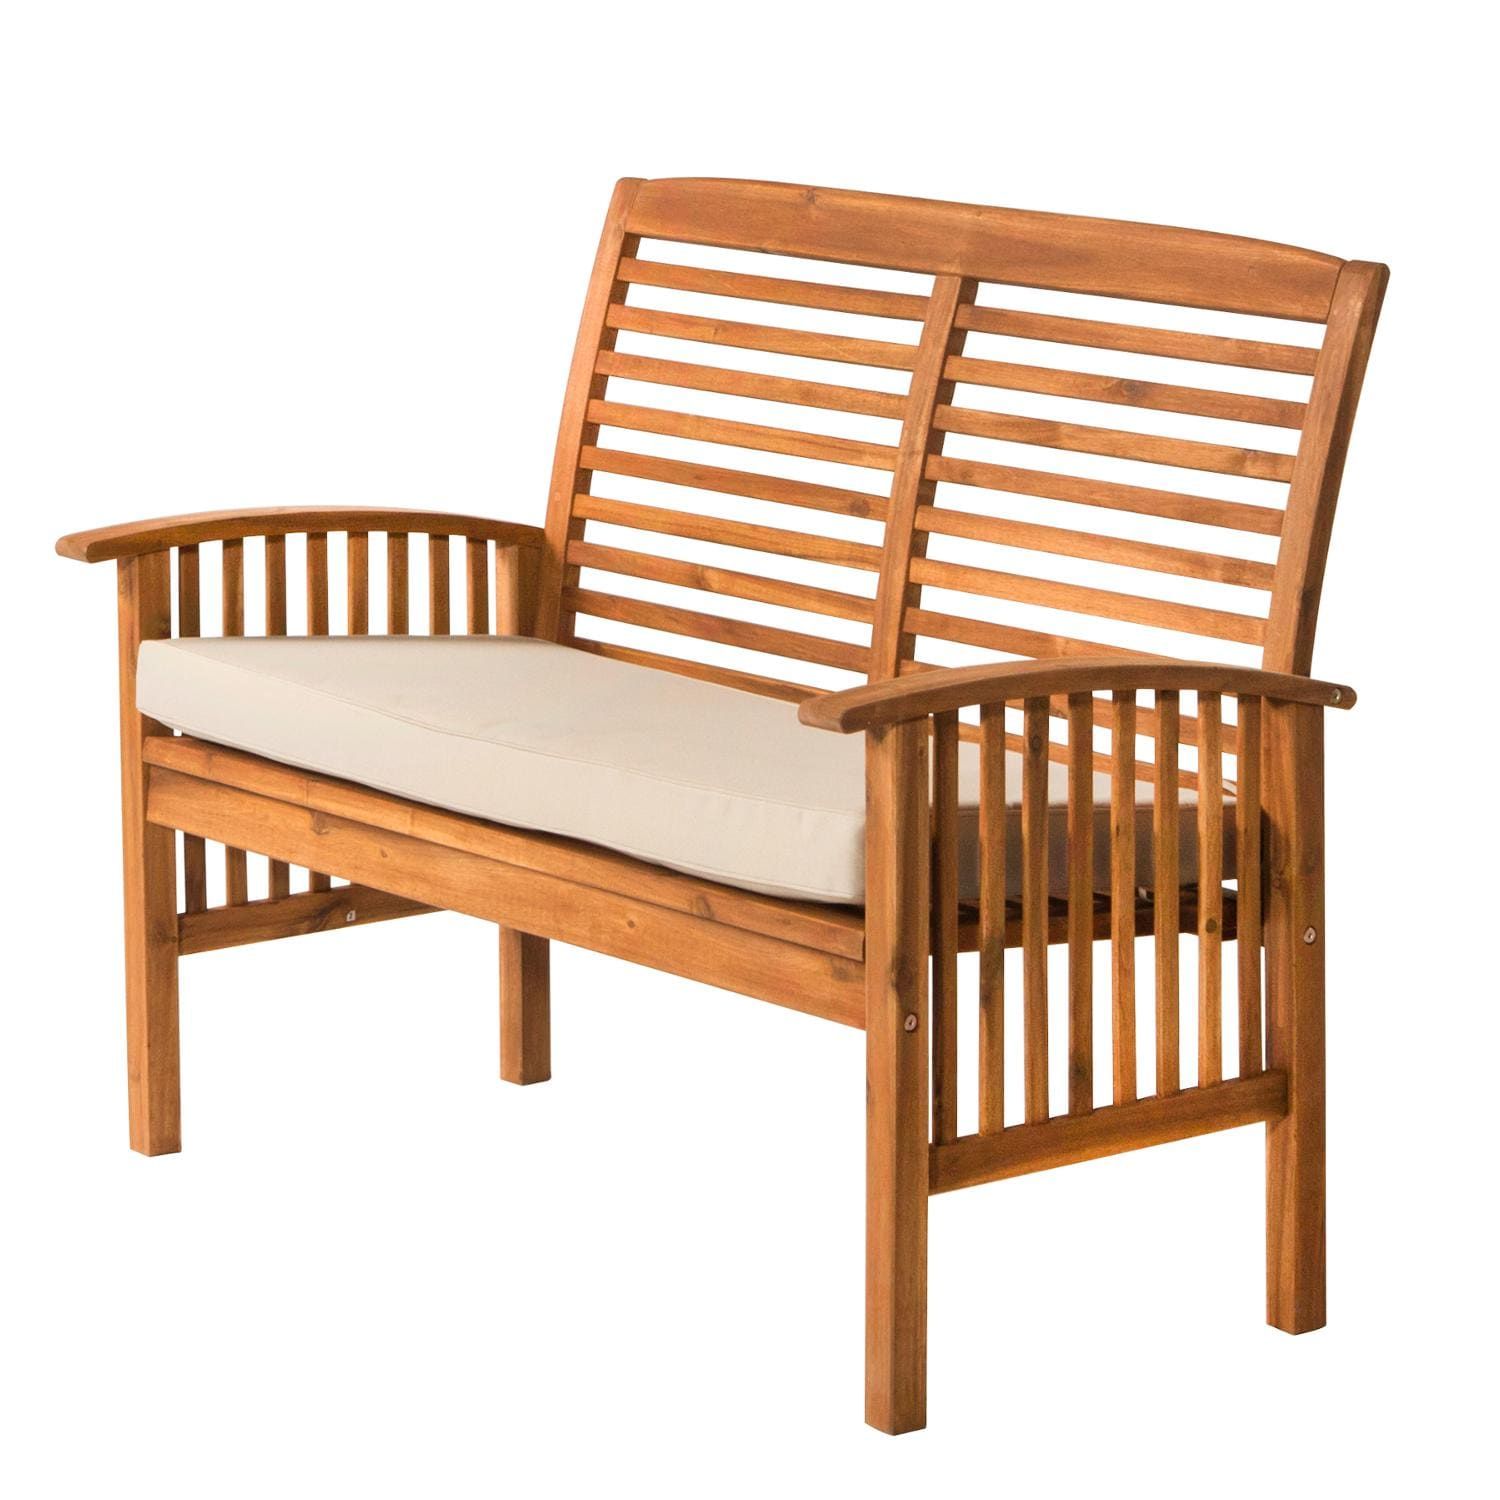 Midland Brown Acacia Patio Loveseat W/ Natural Cushionswalker With Brown Acacia Patio Chairs With Cushions (View 13 of 15)